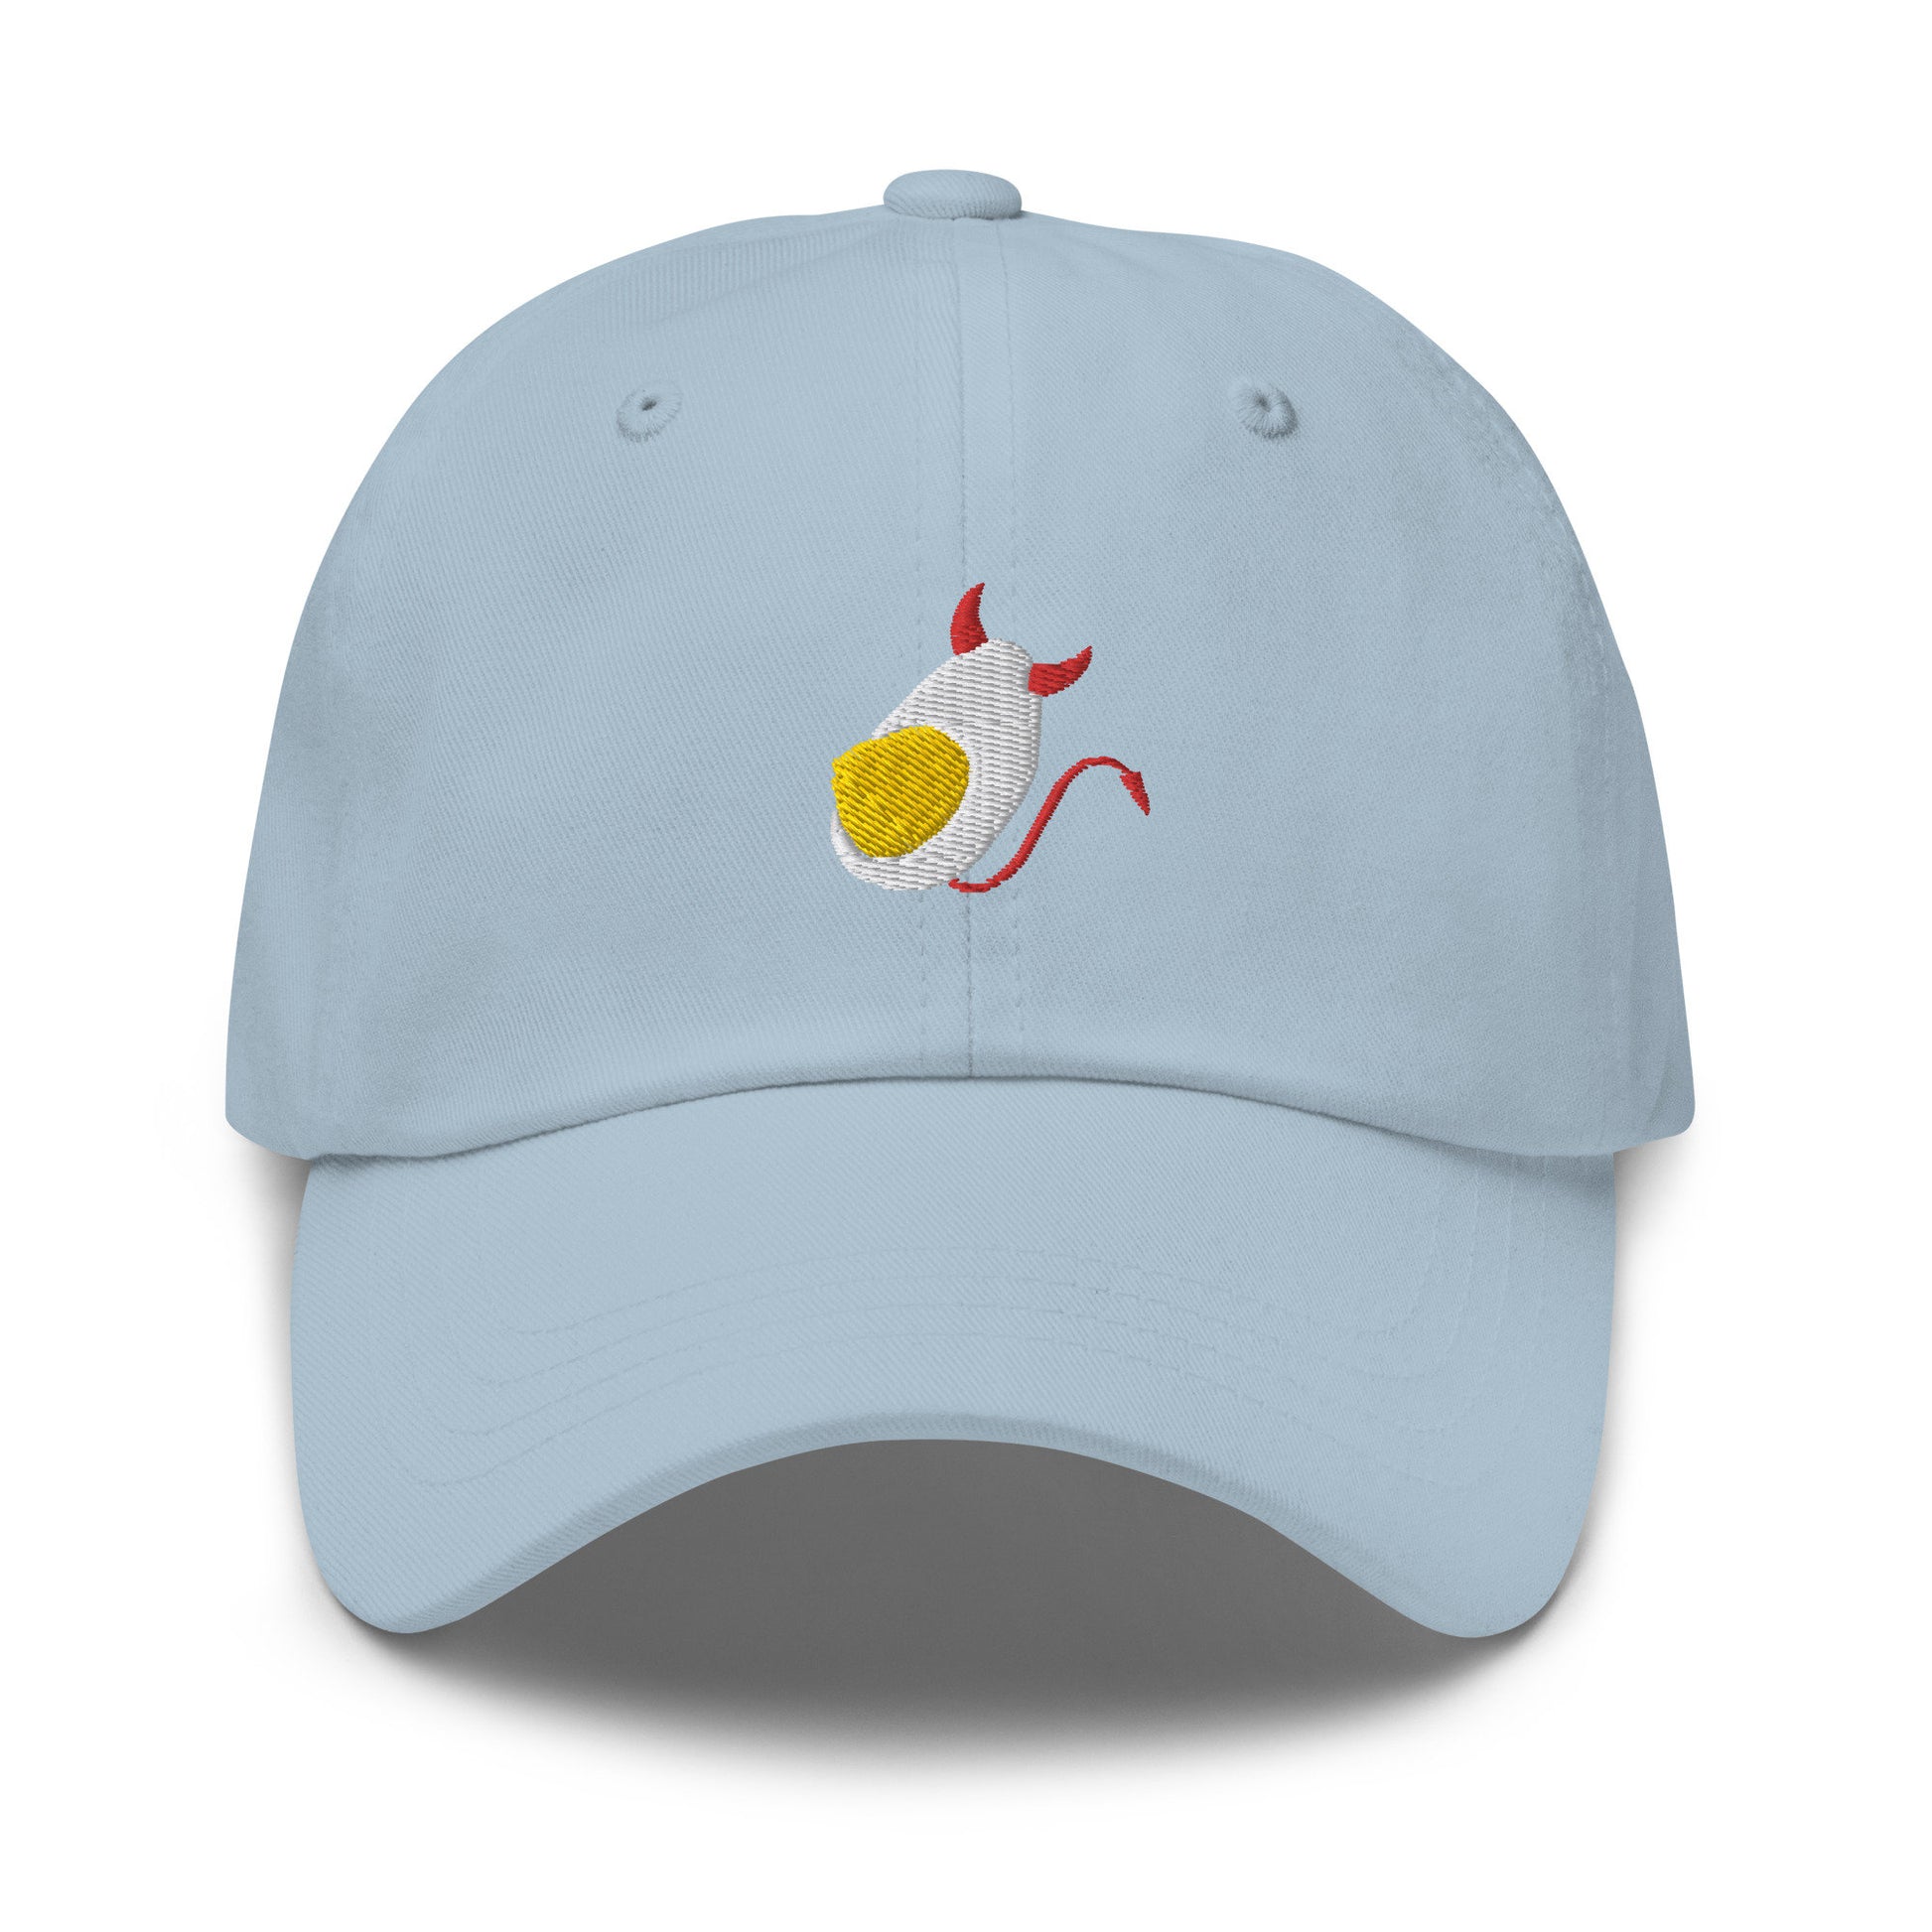 Deviled Egg Hat - Delicious Egg Gifts From Below - Mayo Lovers Gift - Embroidered Cotton Baseball Cap - Multiple Colors